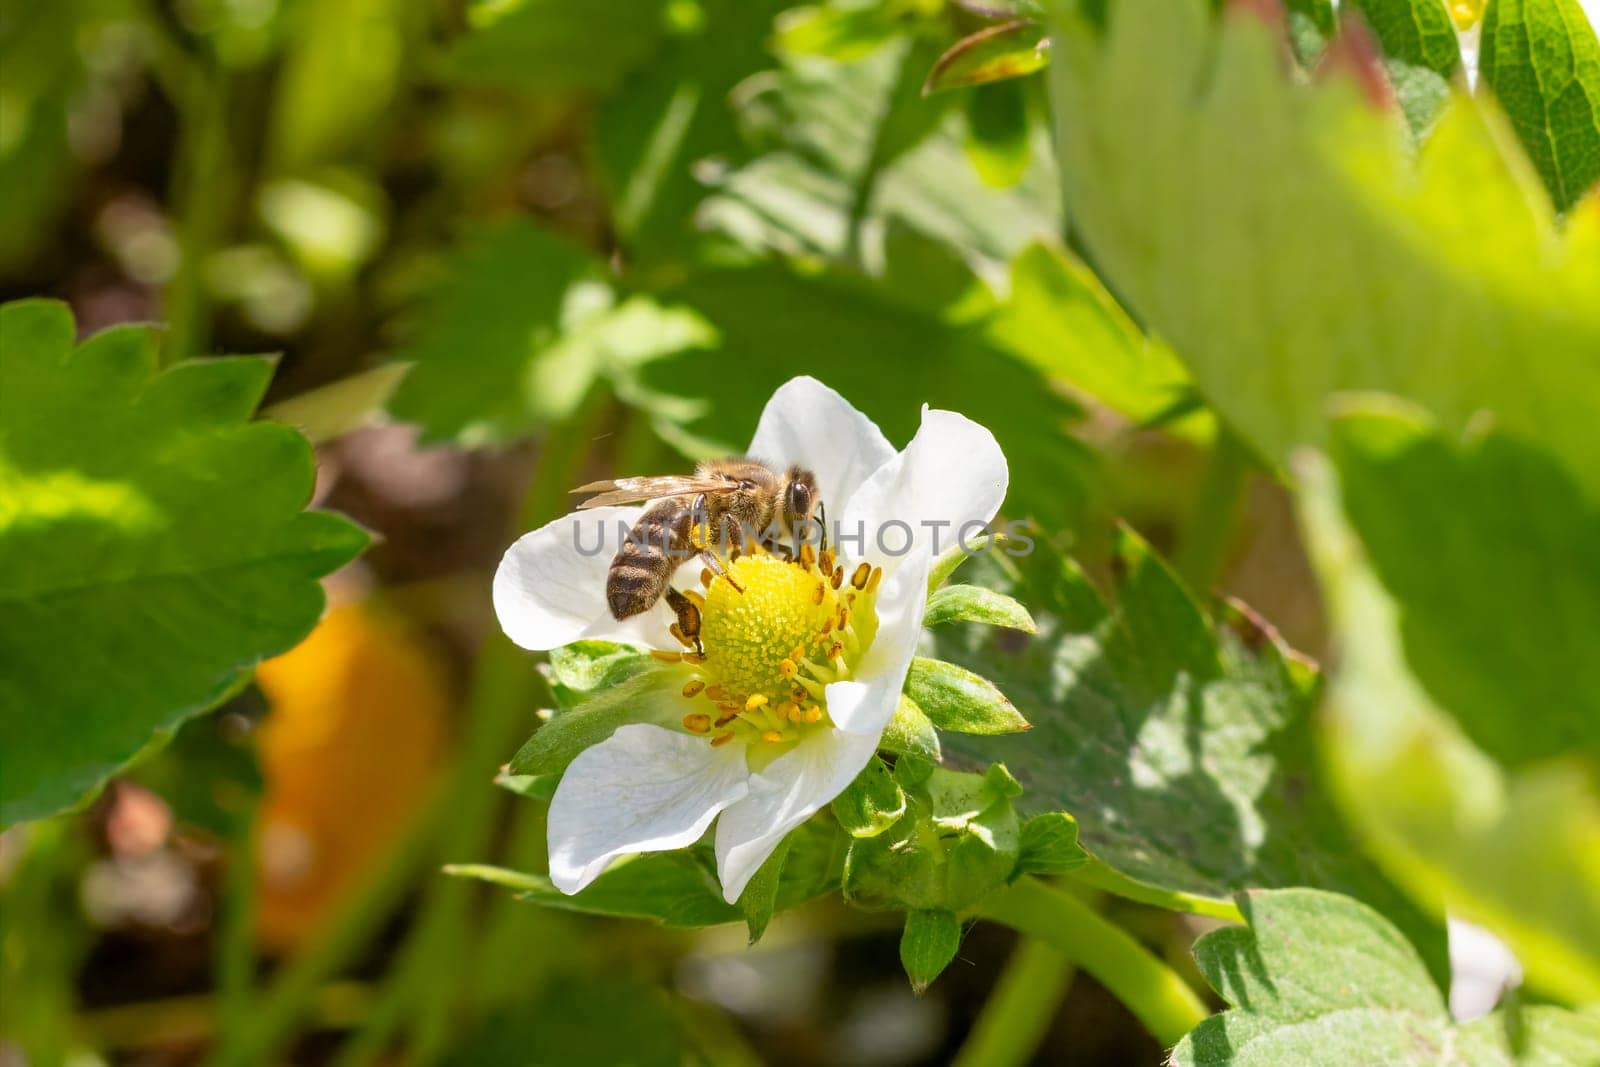 Flowering strawberry bush with a bee in the garden. by mvg6894